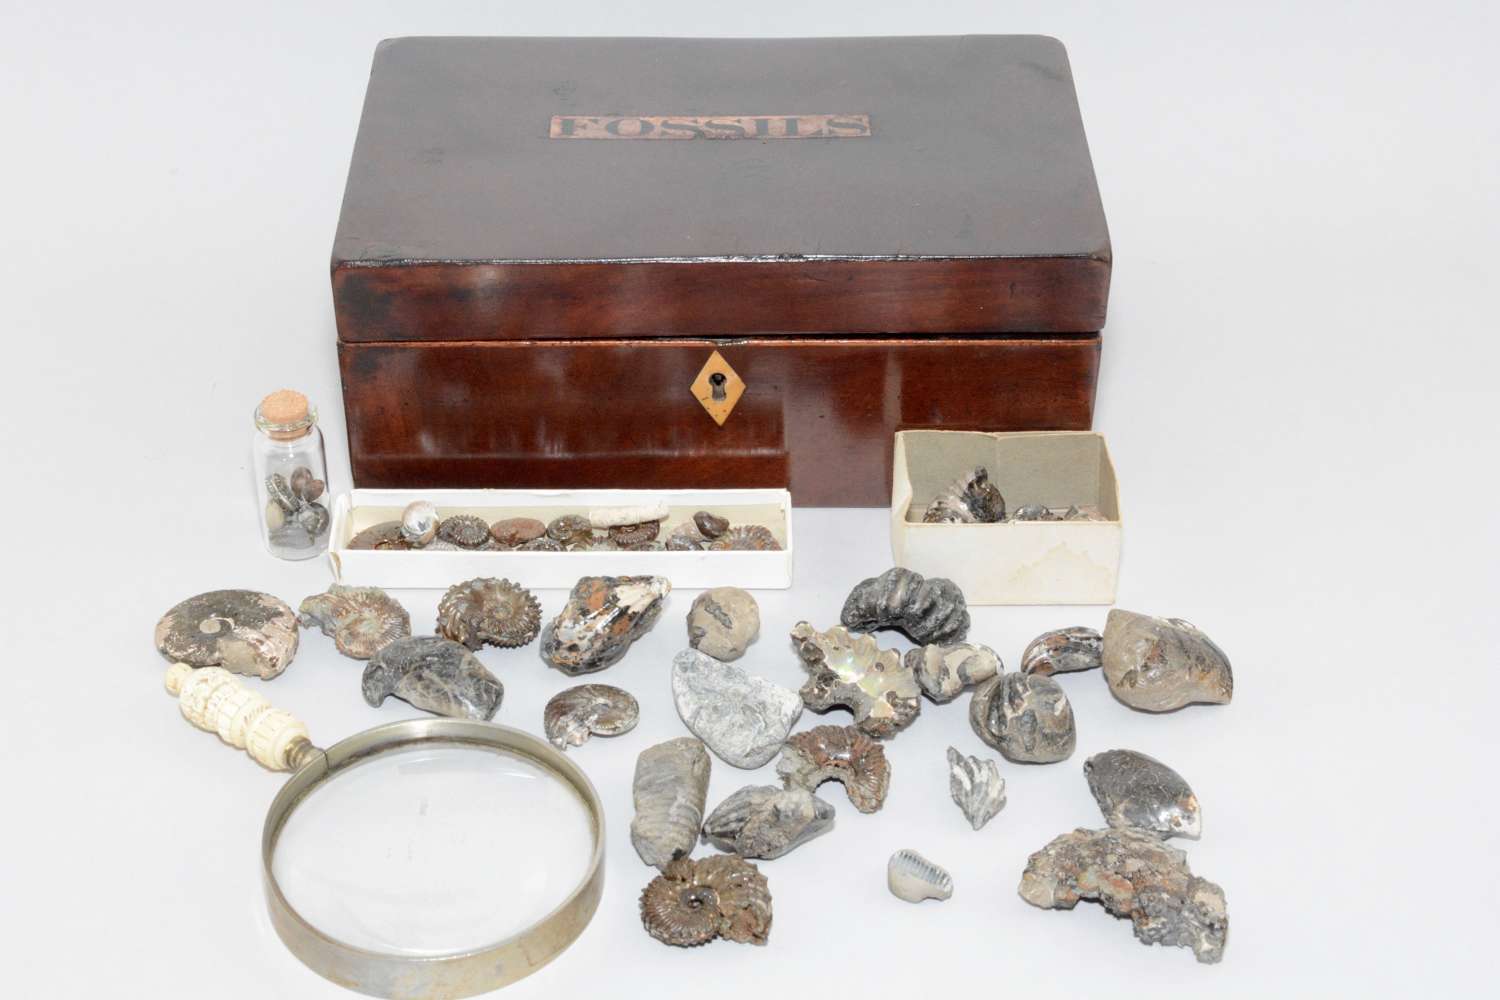 A collection of fossils held within an early Victorian box